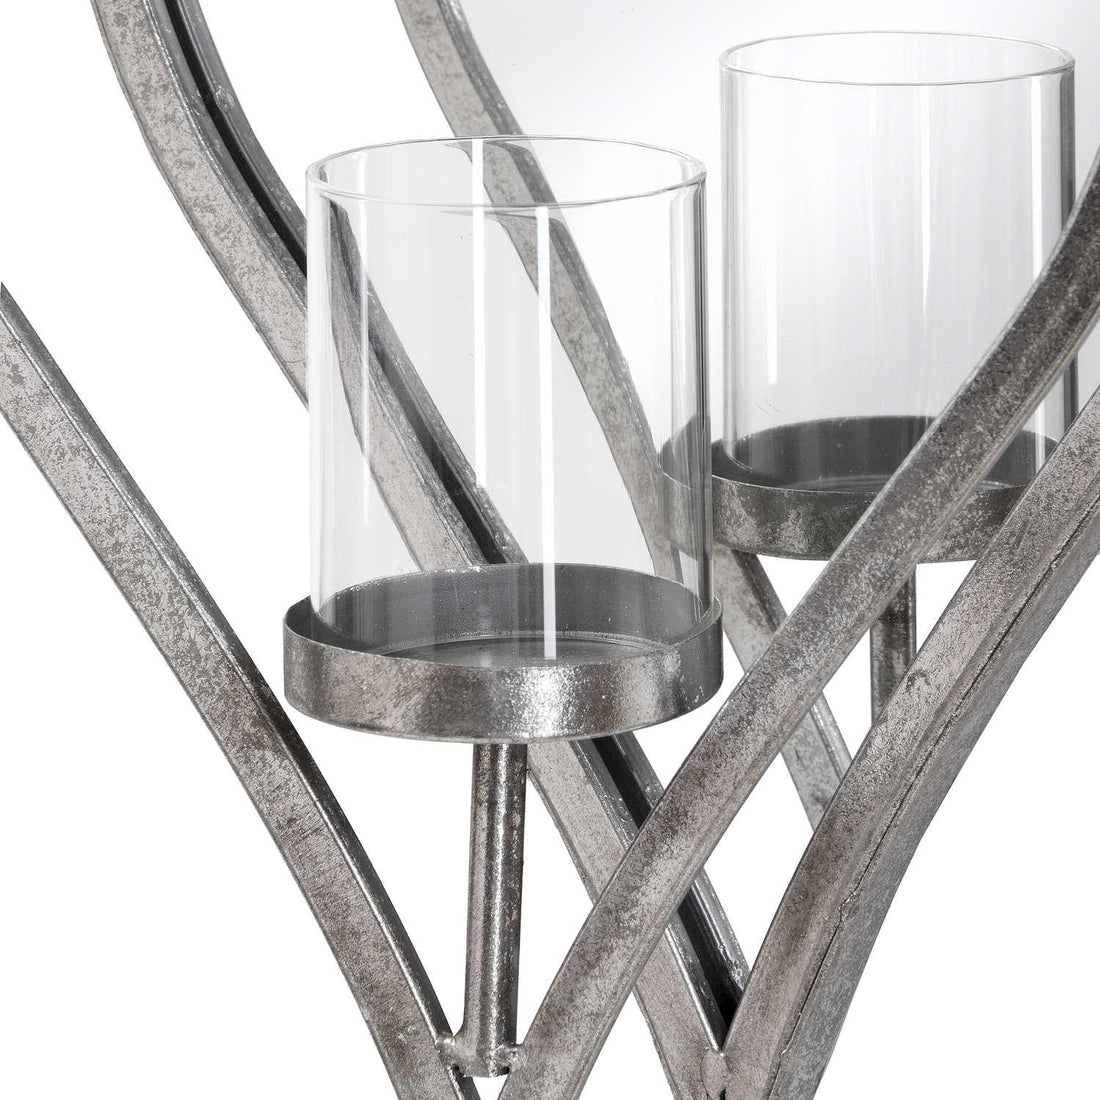 Large Antique Silver Mirrored Heart Candle Holder - £59.95 - Gifts & Accessories > Candle Holders > Candle Holders 